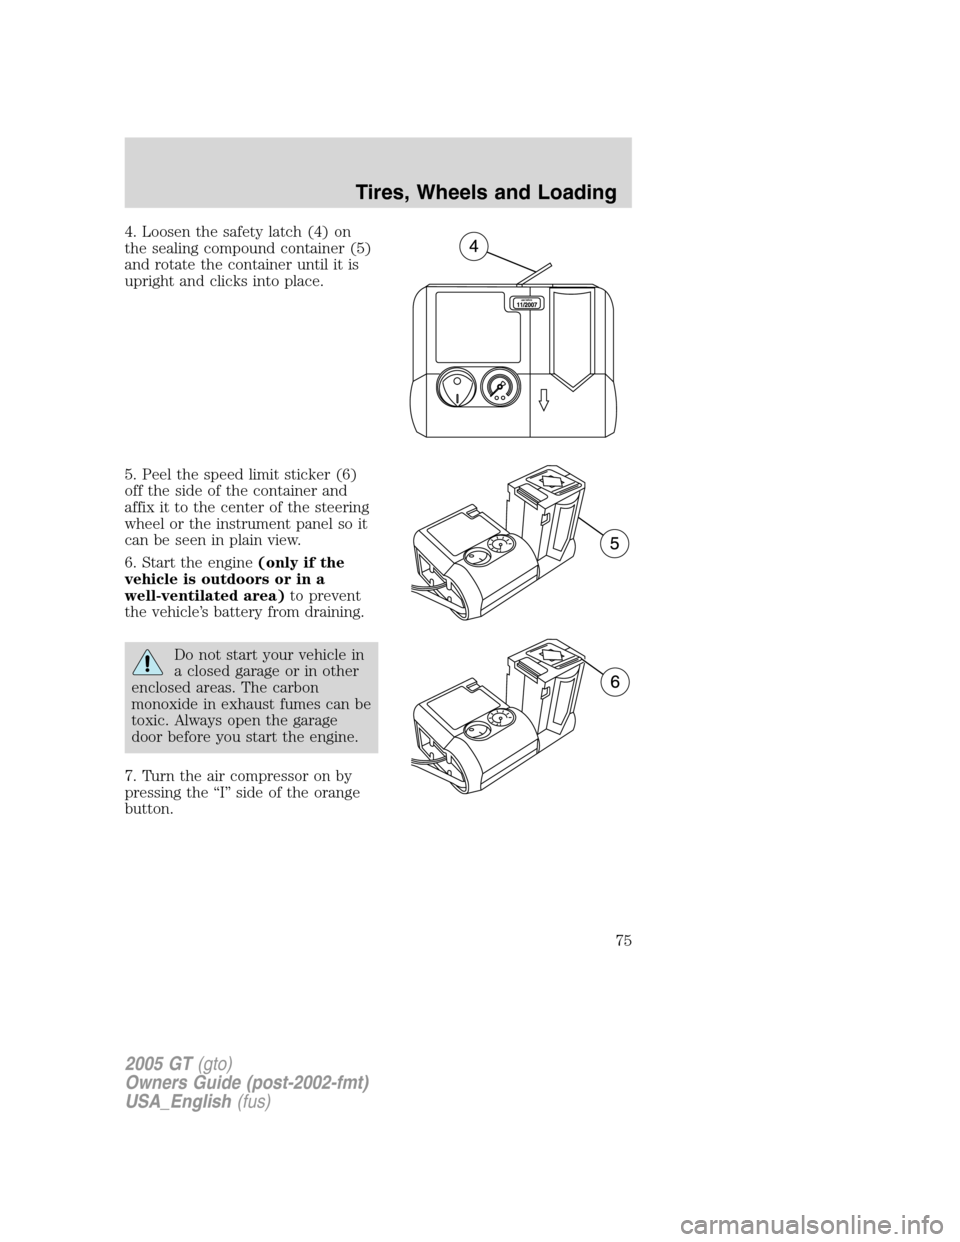 FORD GT 2005 1.G Owners Manual 
4. Loosen the safety latch (4) on
the sealing compound container (5)
and rotate the container until it is
upright and clicks into place.
5. Peel the speed limit sticker (6)
off the side of the contai